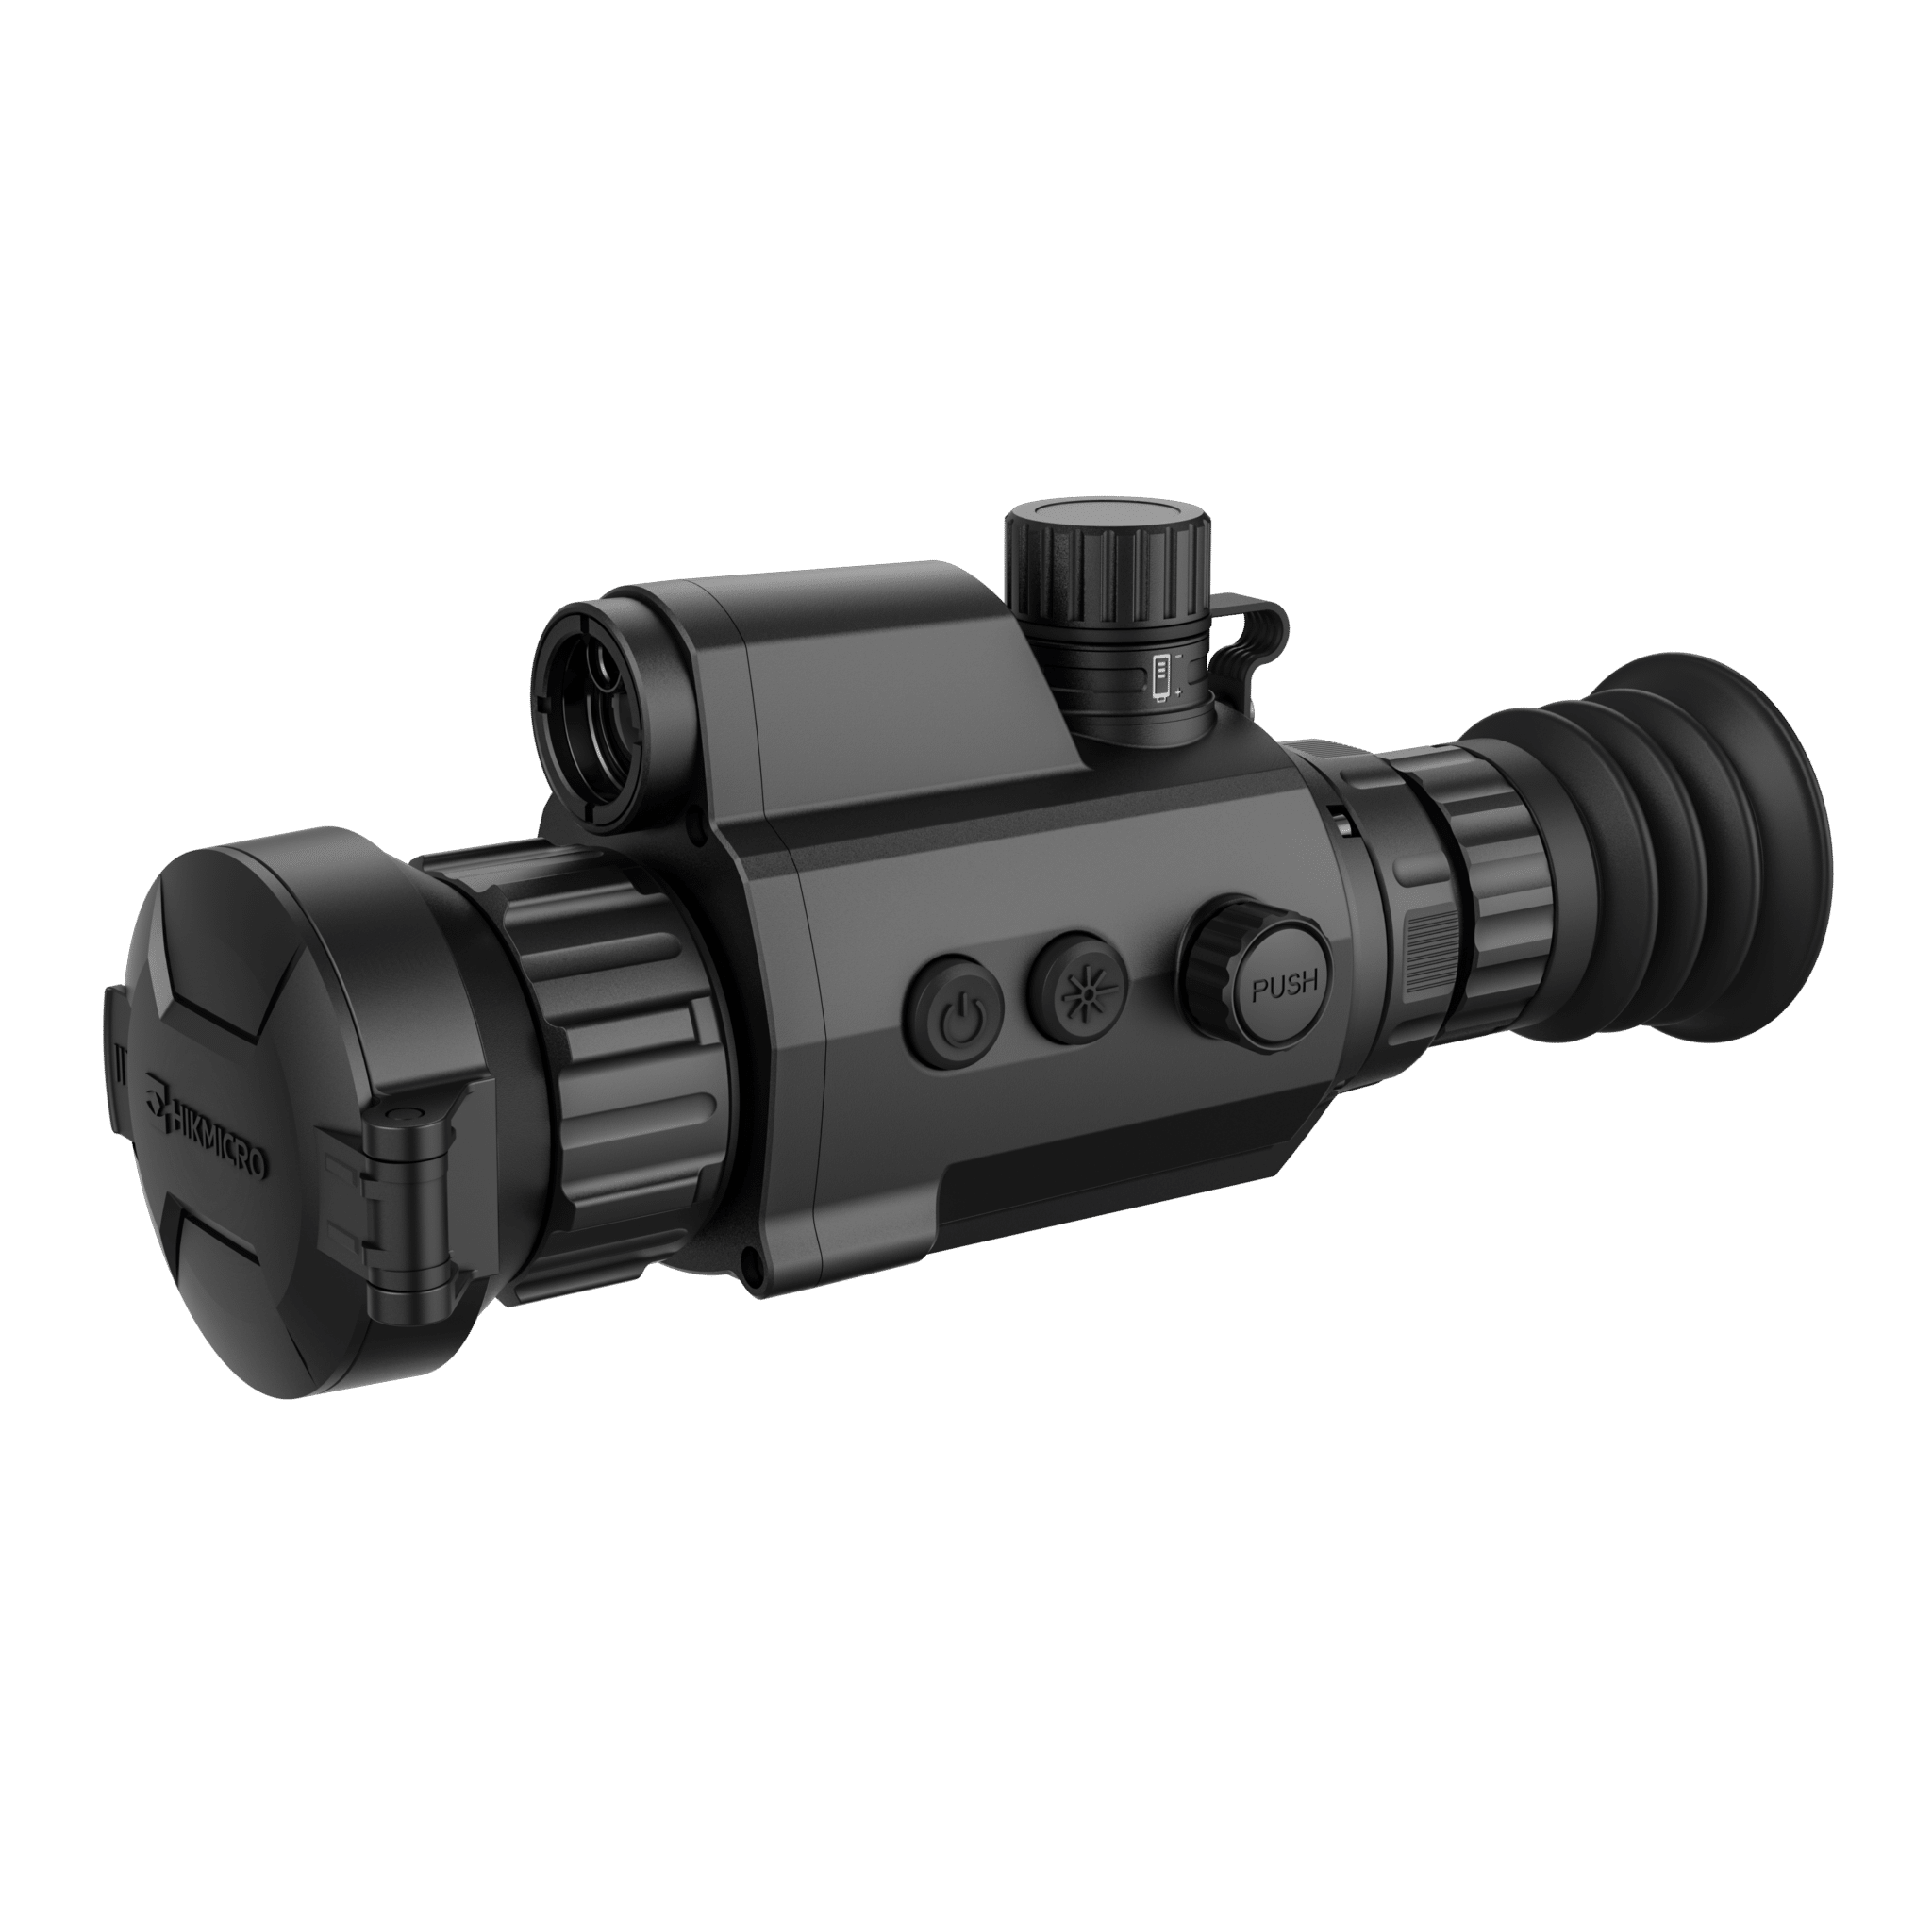 HIKMICRO Panther 2.0 PQ50L Thermal Scope